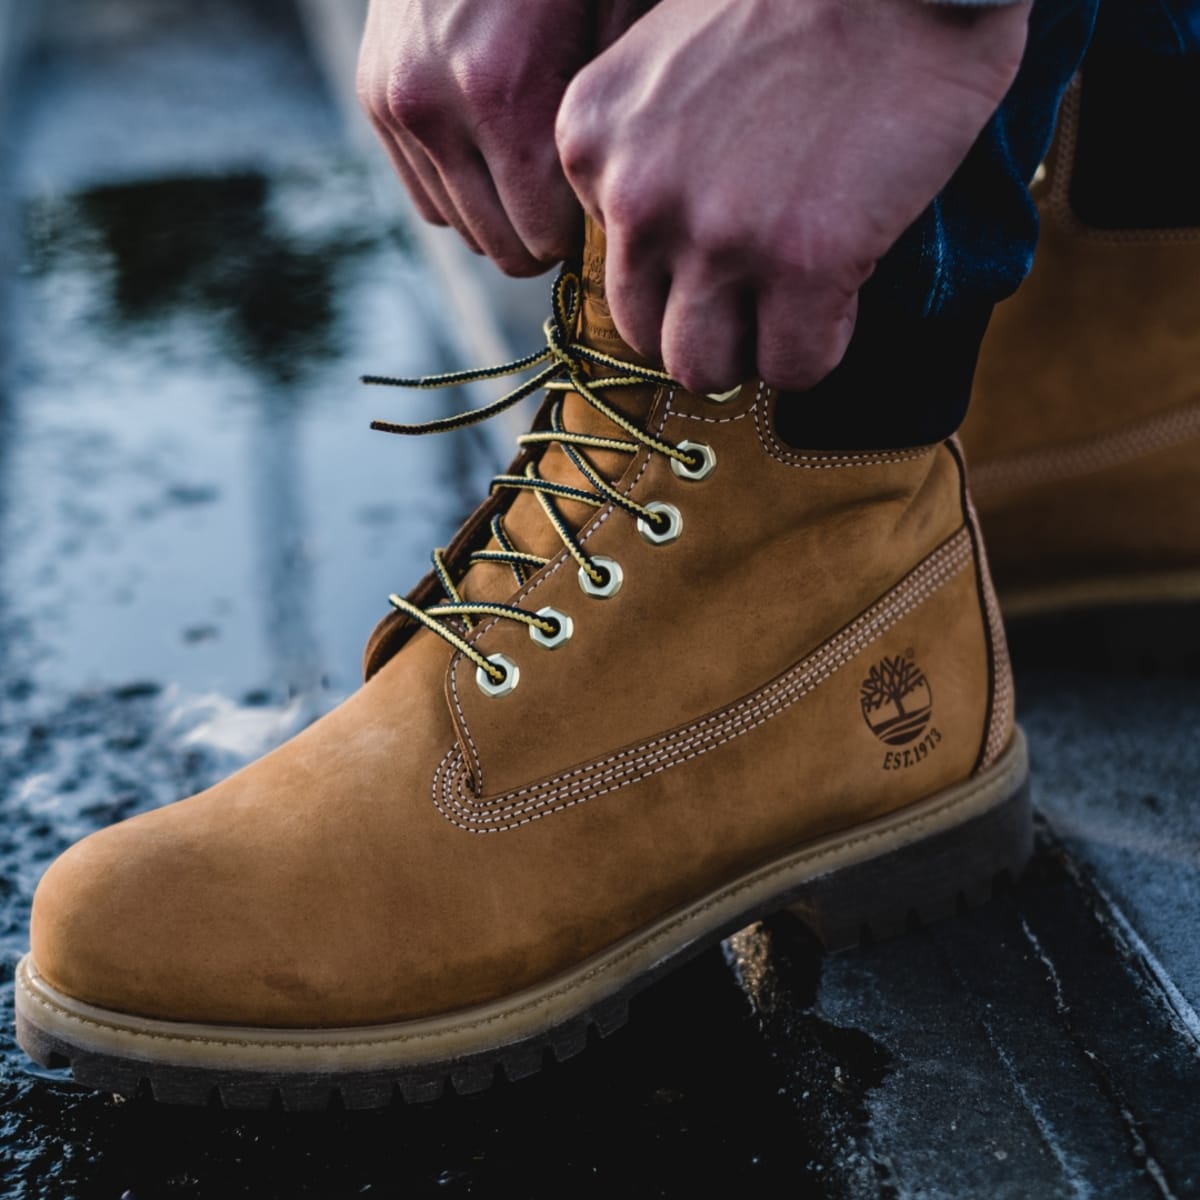 Filson 101: How to Care For Your Leather Boots